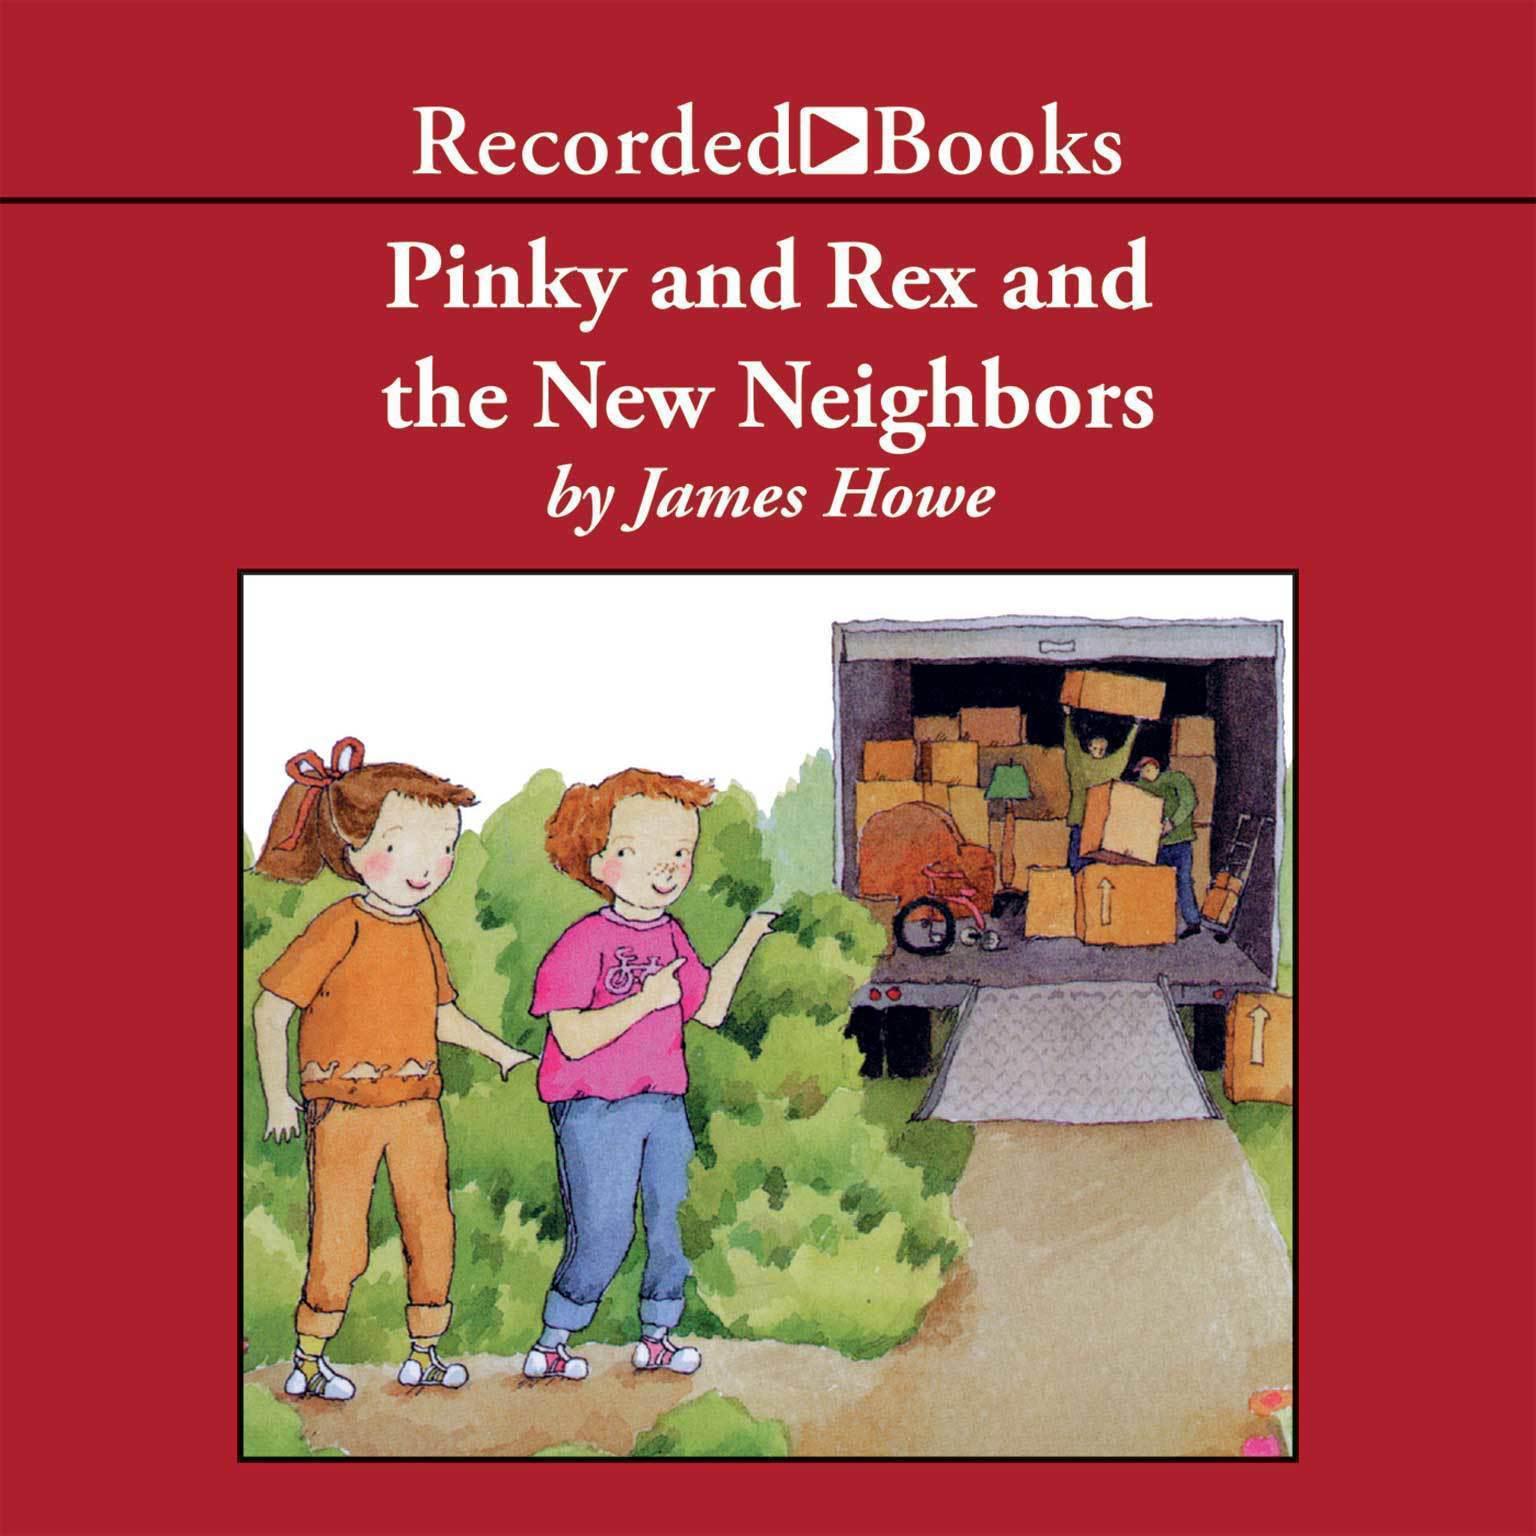 Pinky and Rex and the New Neighbors Audiobook, by James Howe